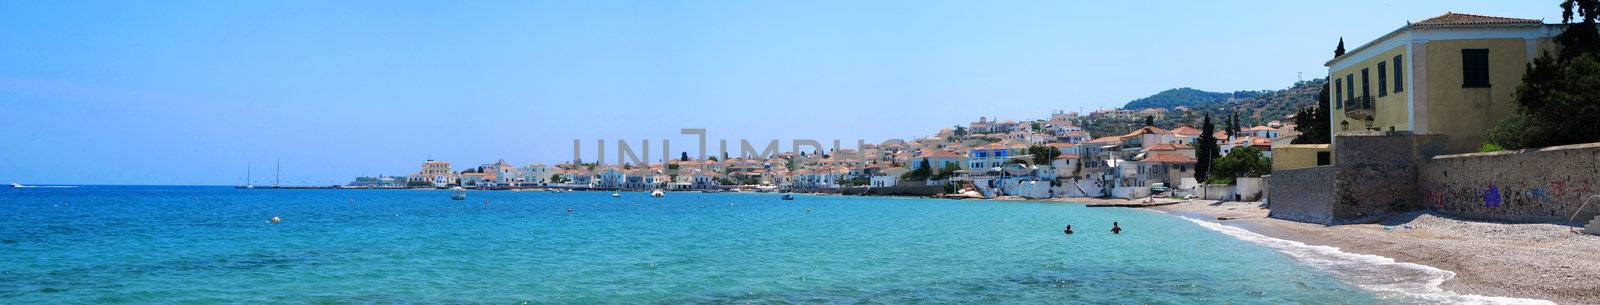 panorama of Spetses by Arrxxx